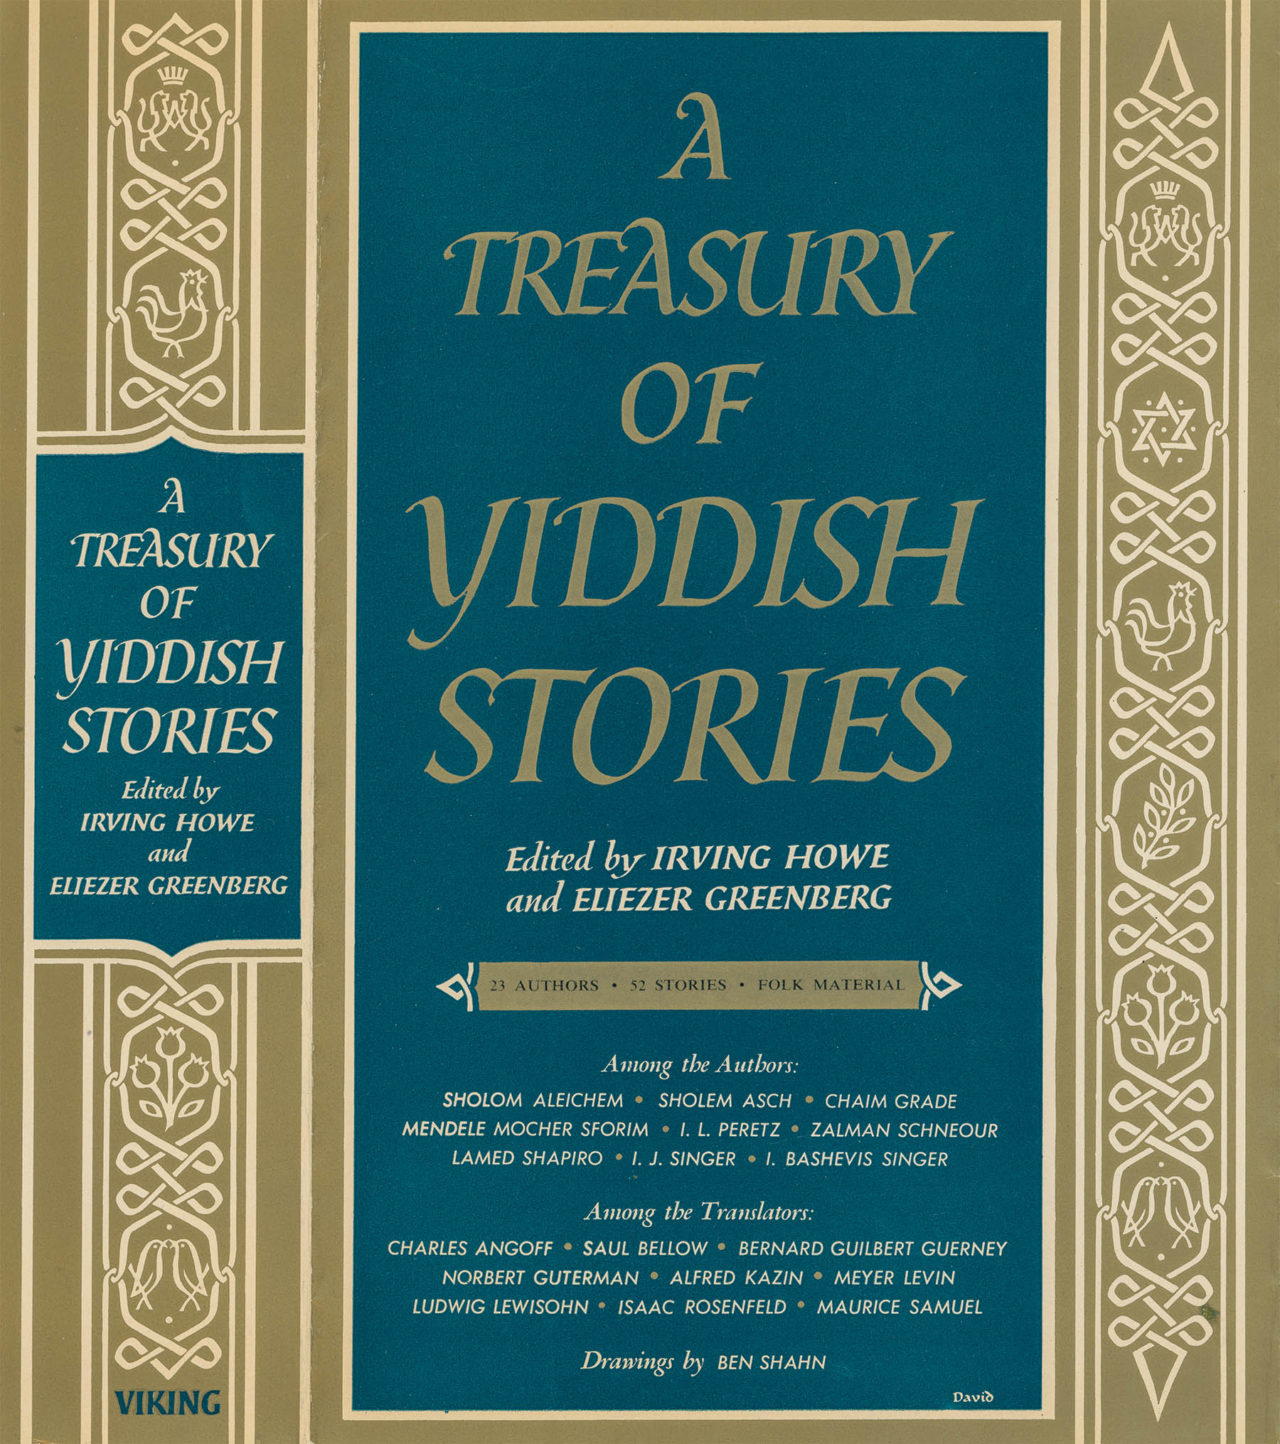 Dust jacket for A Treasury of Yiddish Stories